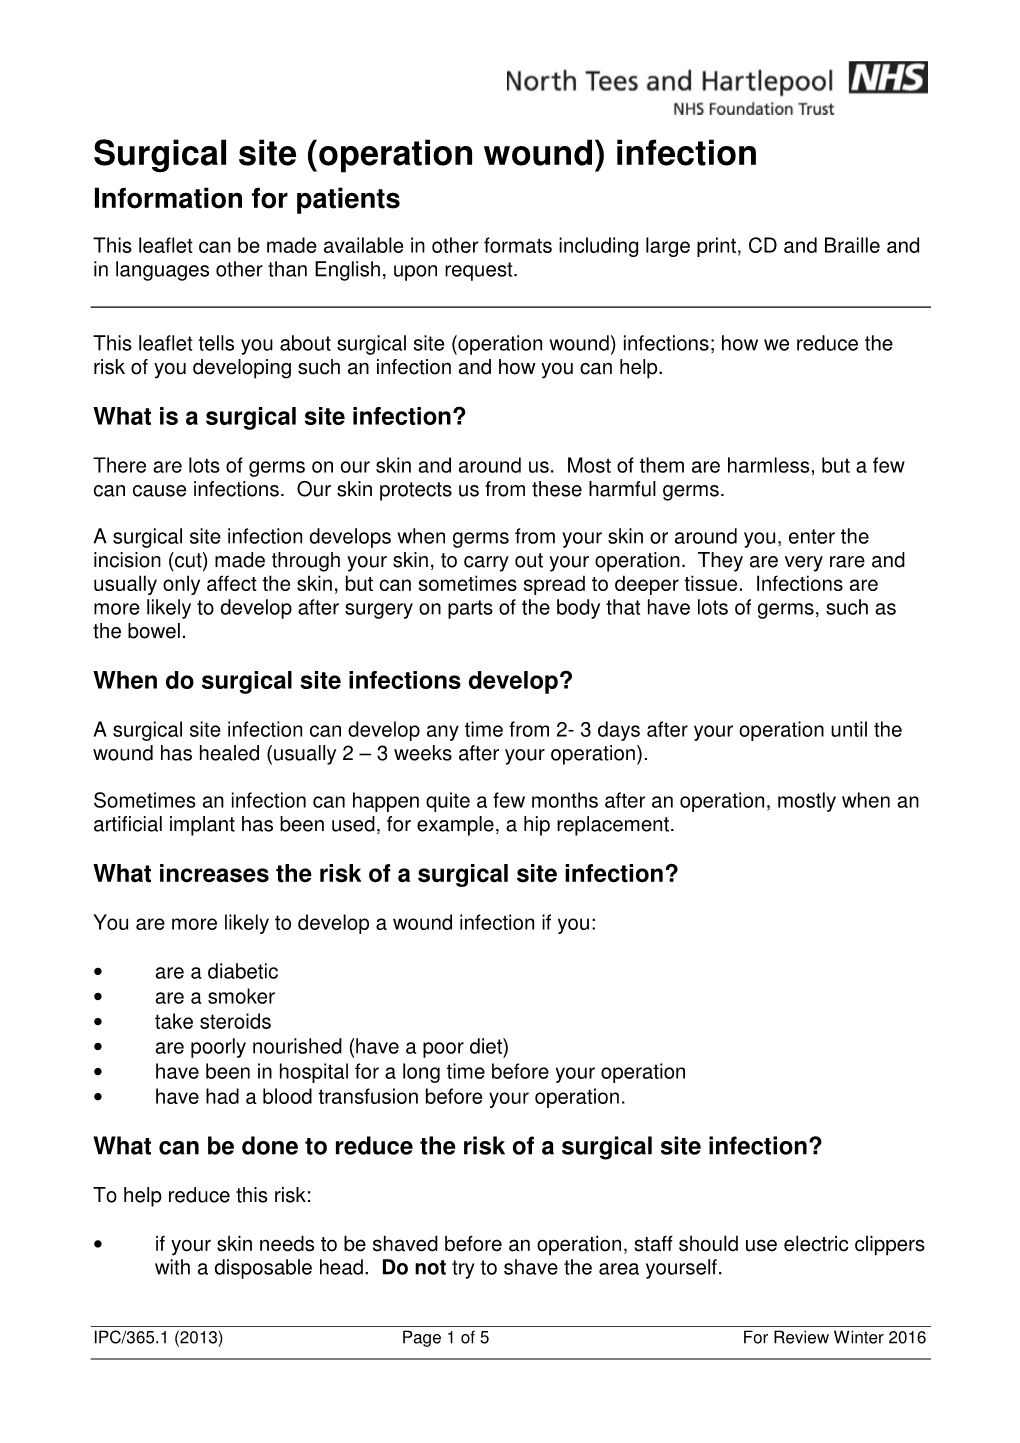 Surgical Site (Operation Wound) Infection Information for Patients